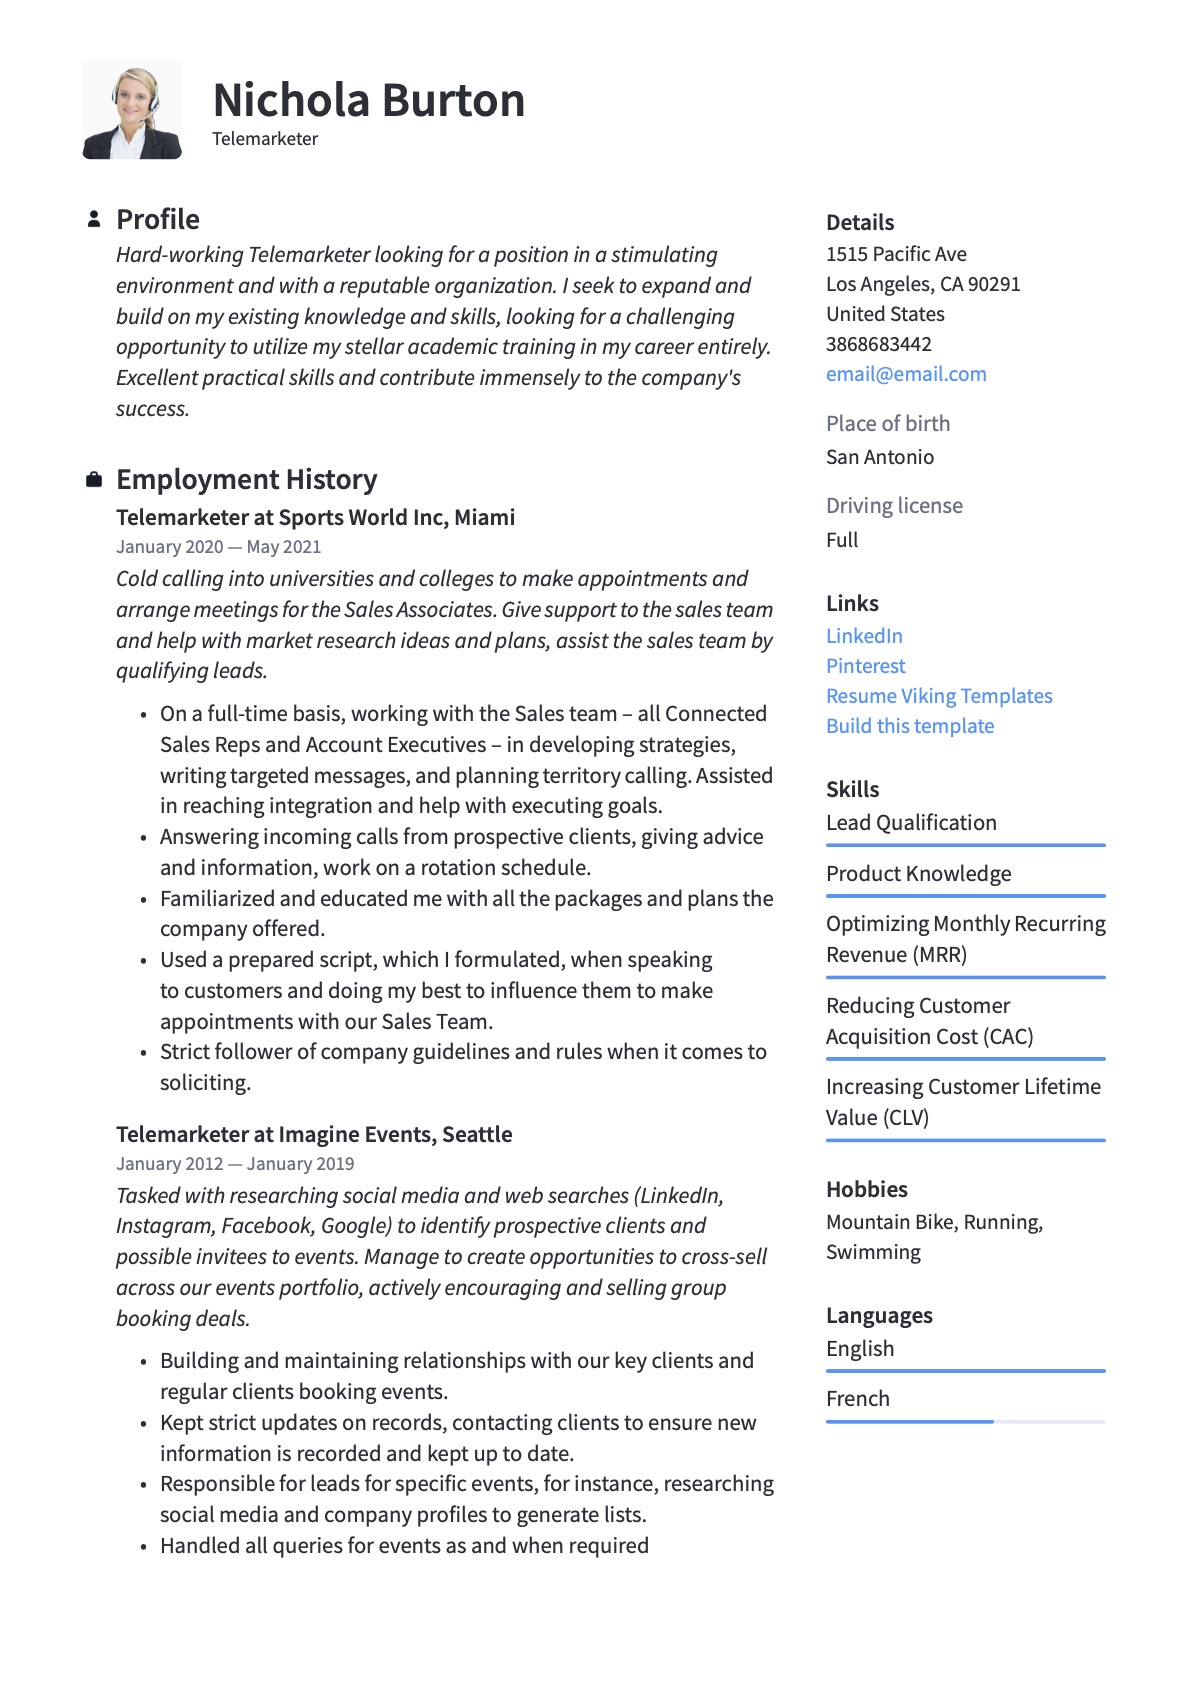 Professional Telemarketer Resume Template